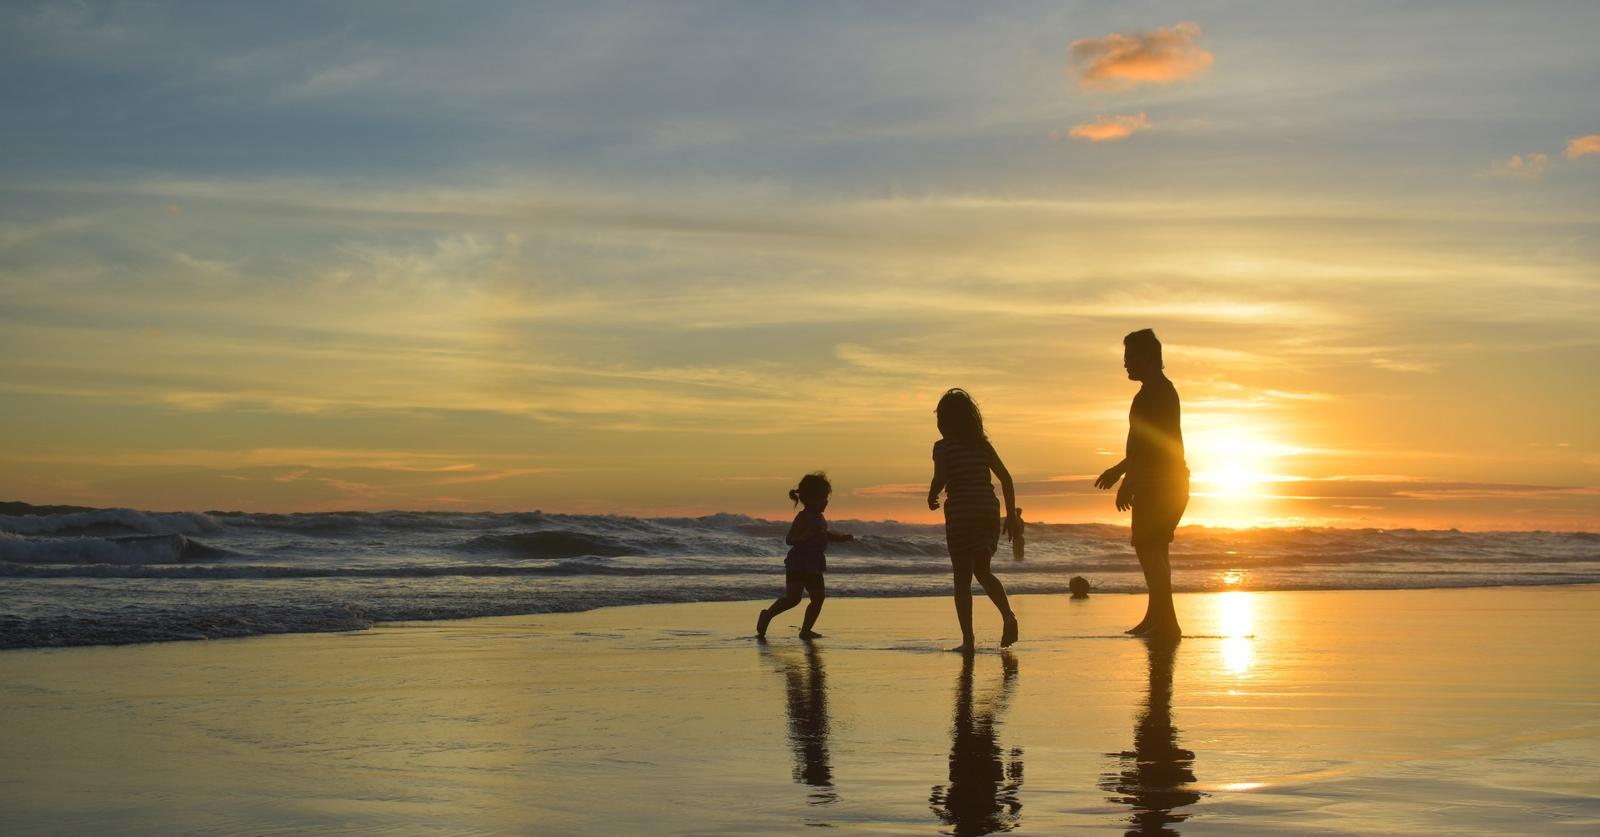 Affordable Beach Vacations For The Family Boston, Arizona And More